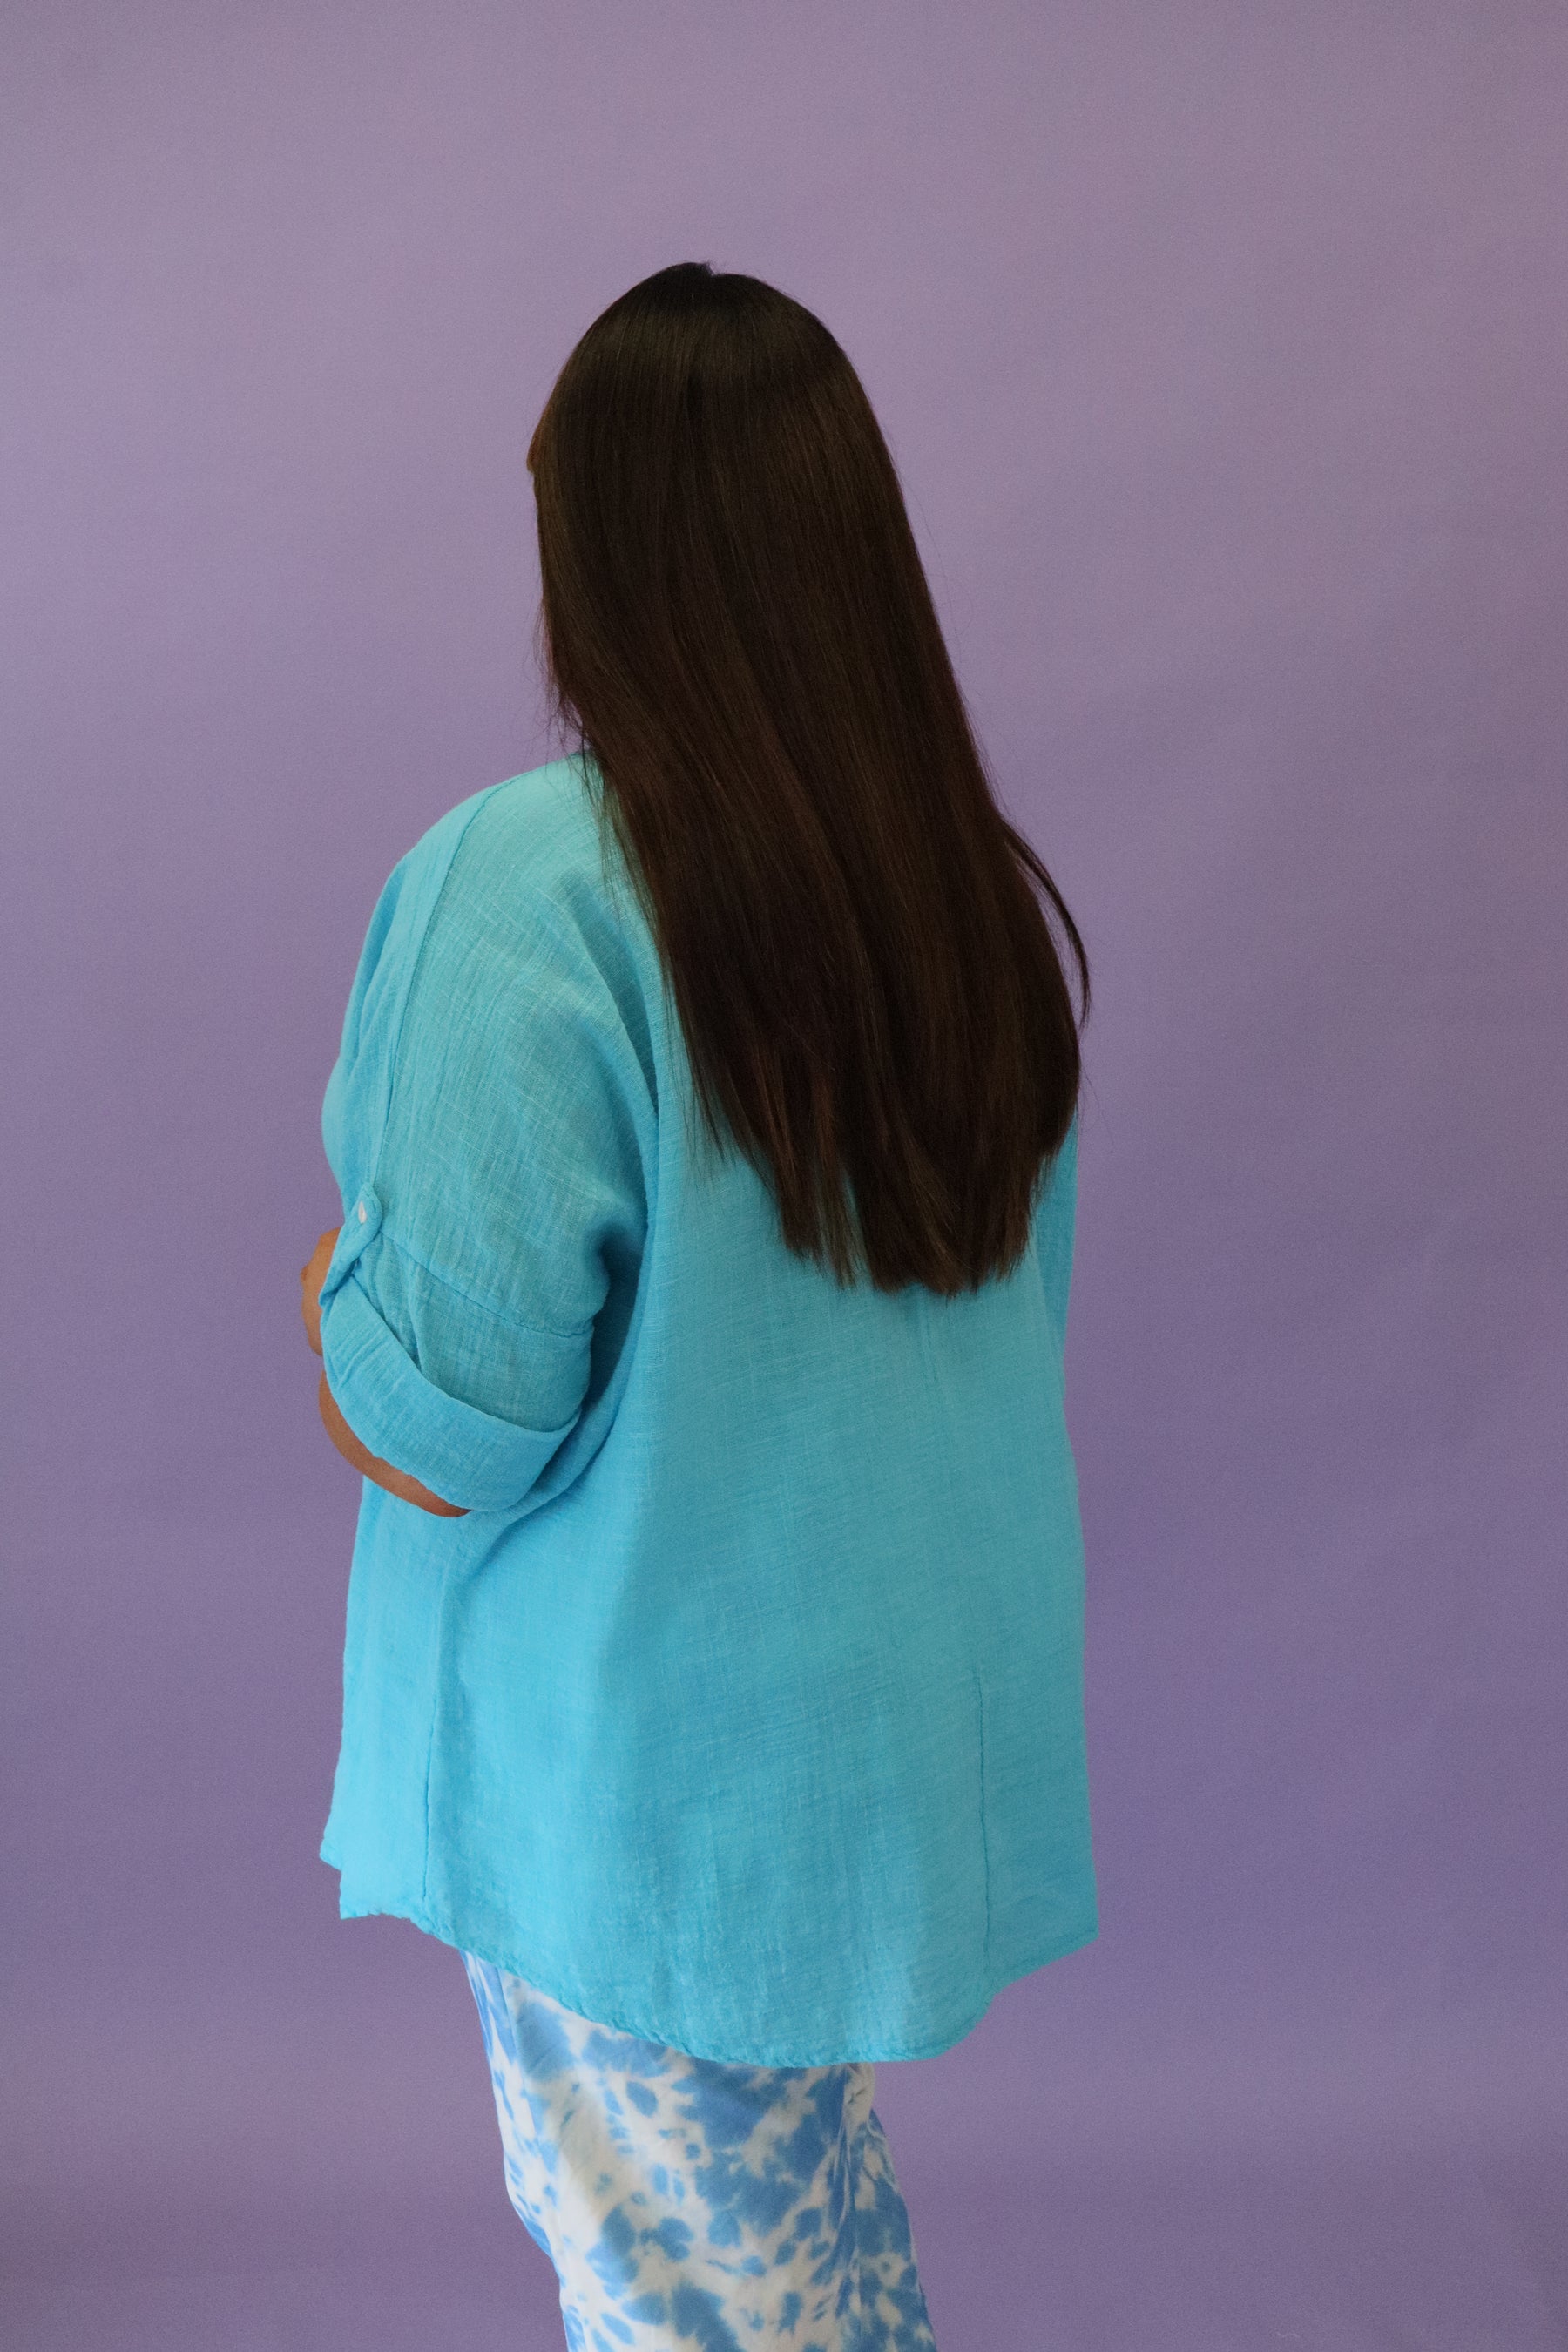 Elsie Cotton Top in Turquoise